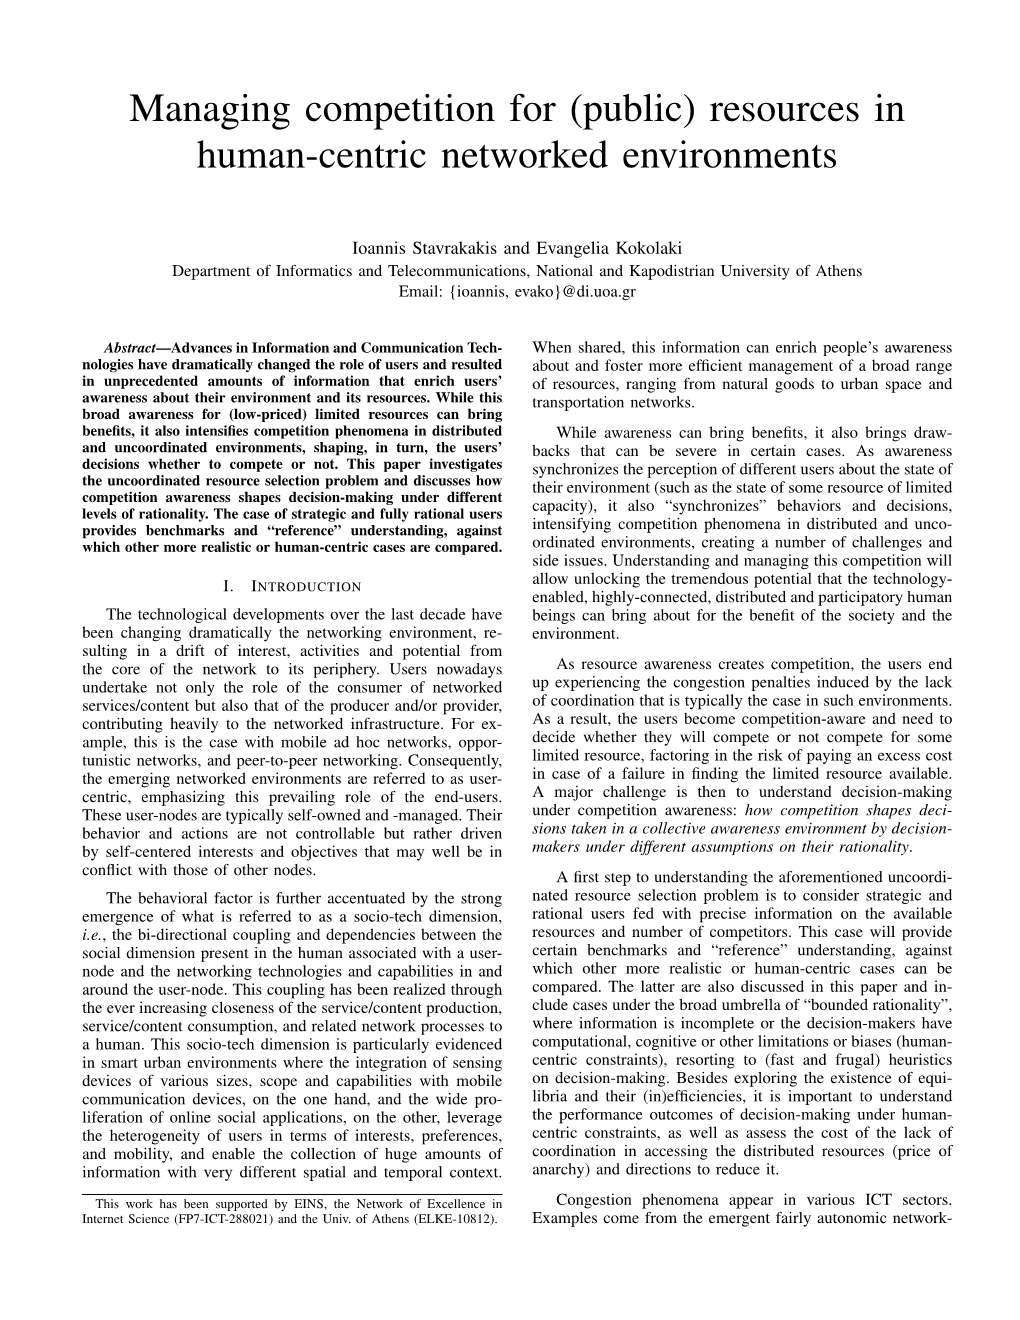 (Public) Resources in Human-Centric Networked Environments